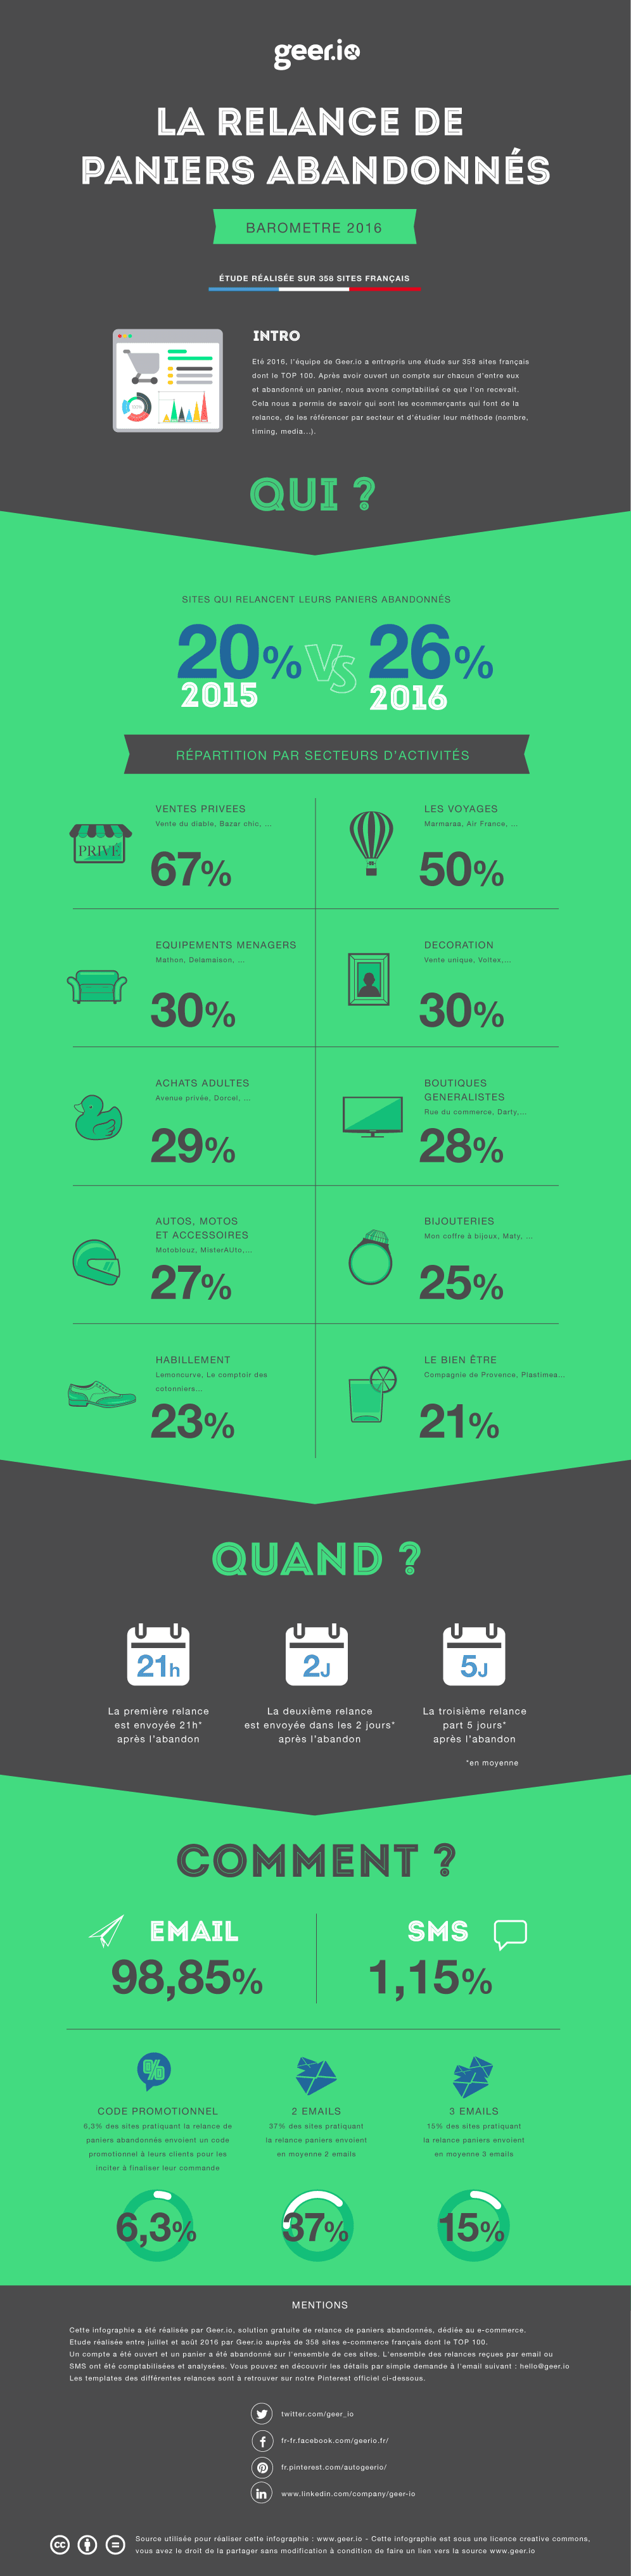 infographie-email-panier-abandonne